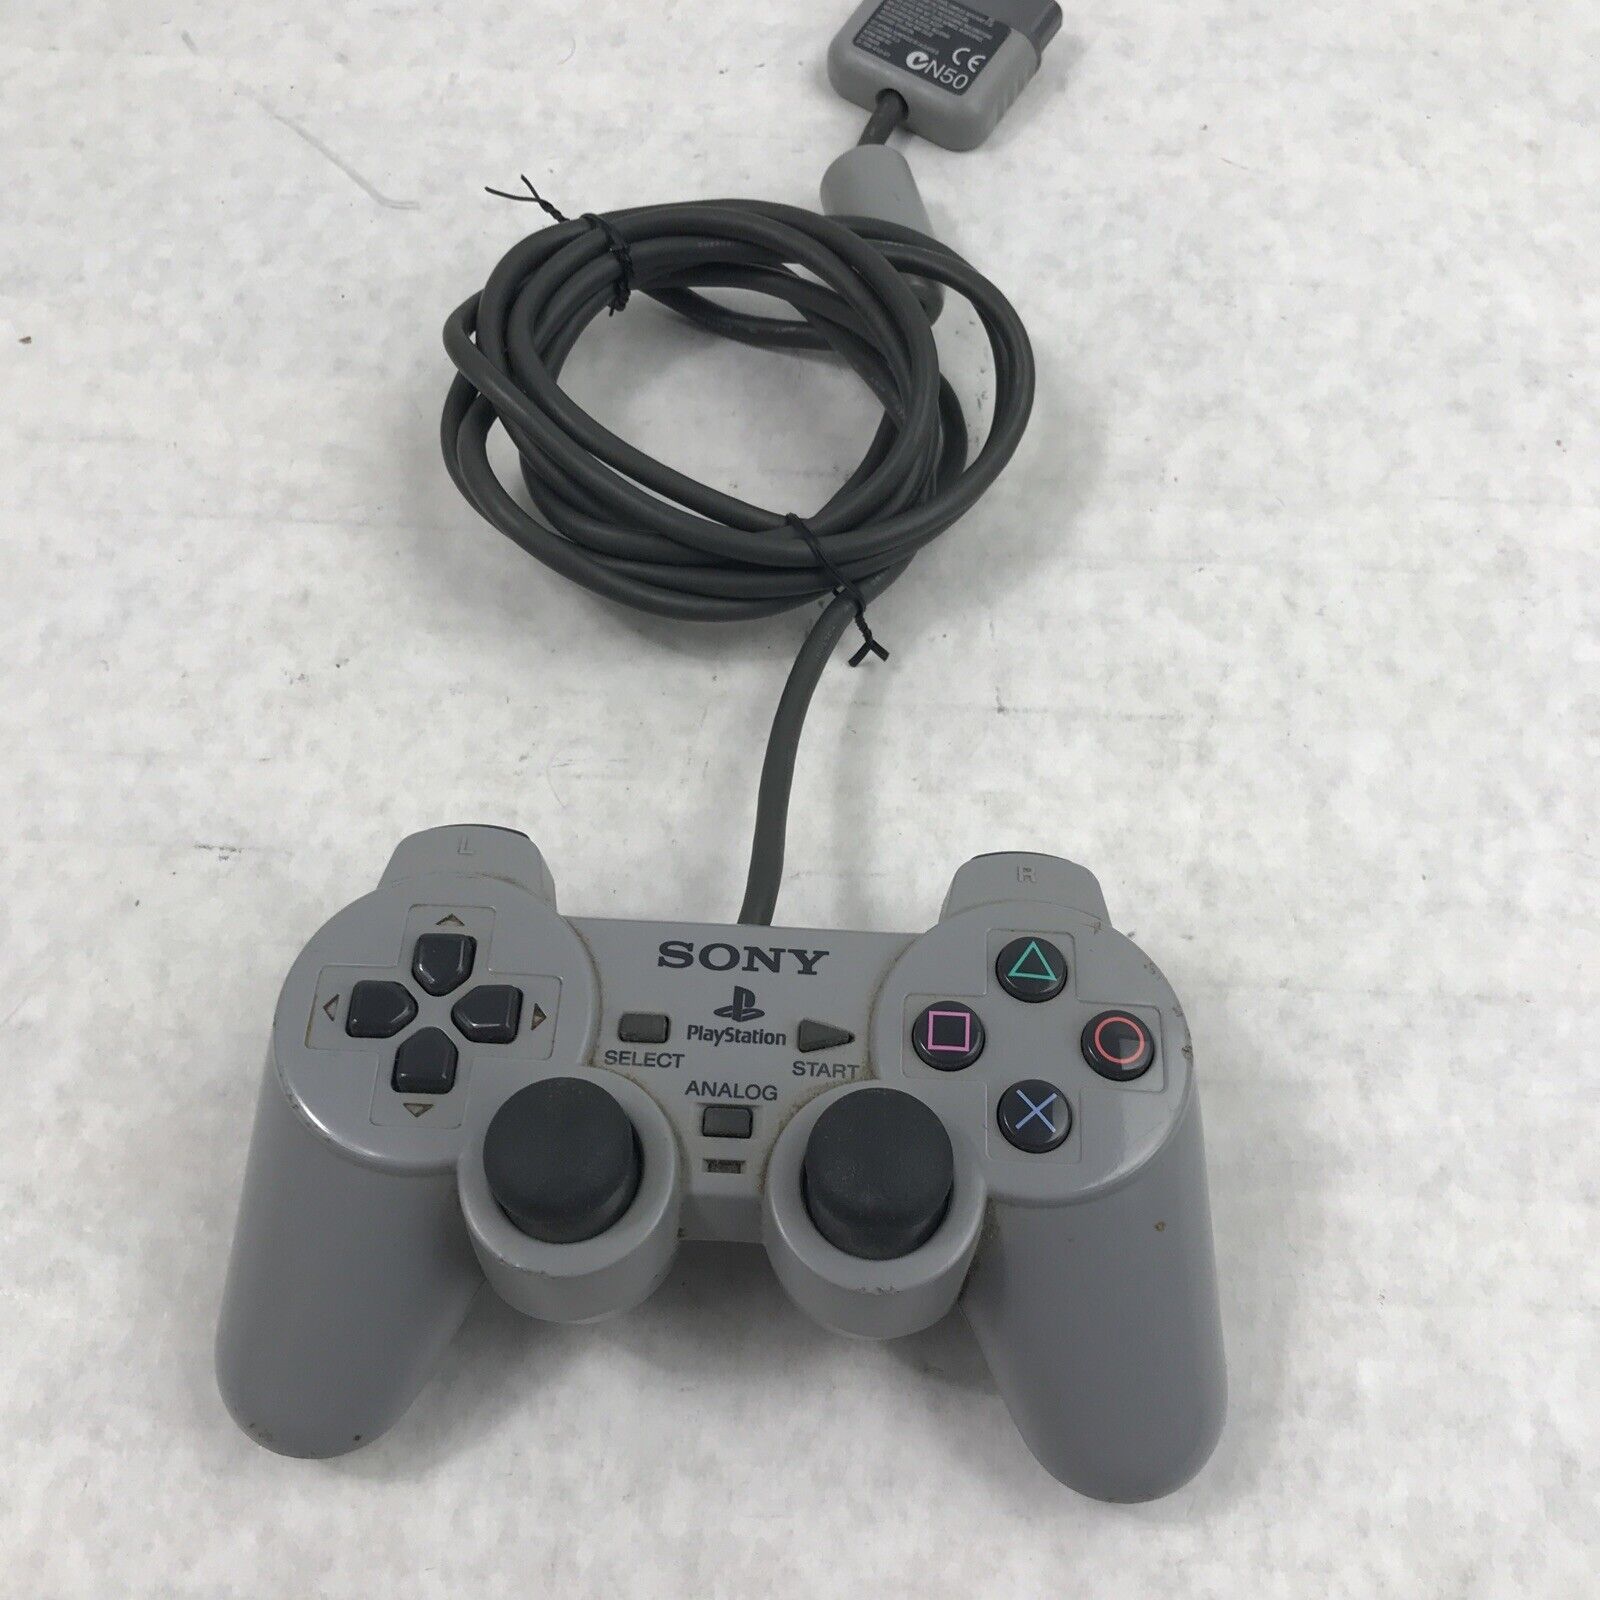 Official OEM Sony PlayStation PS1 Dual Shock Analog Controller SCPH-12